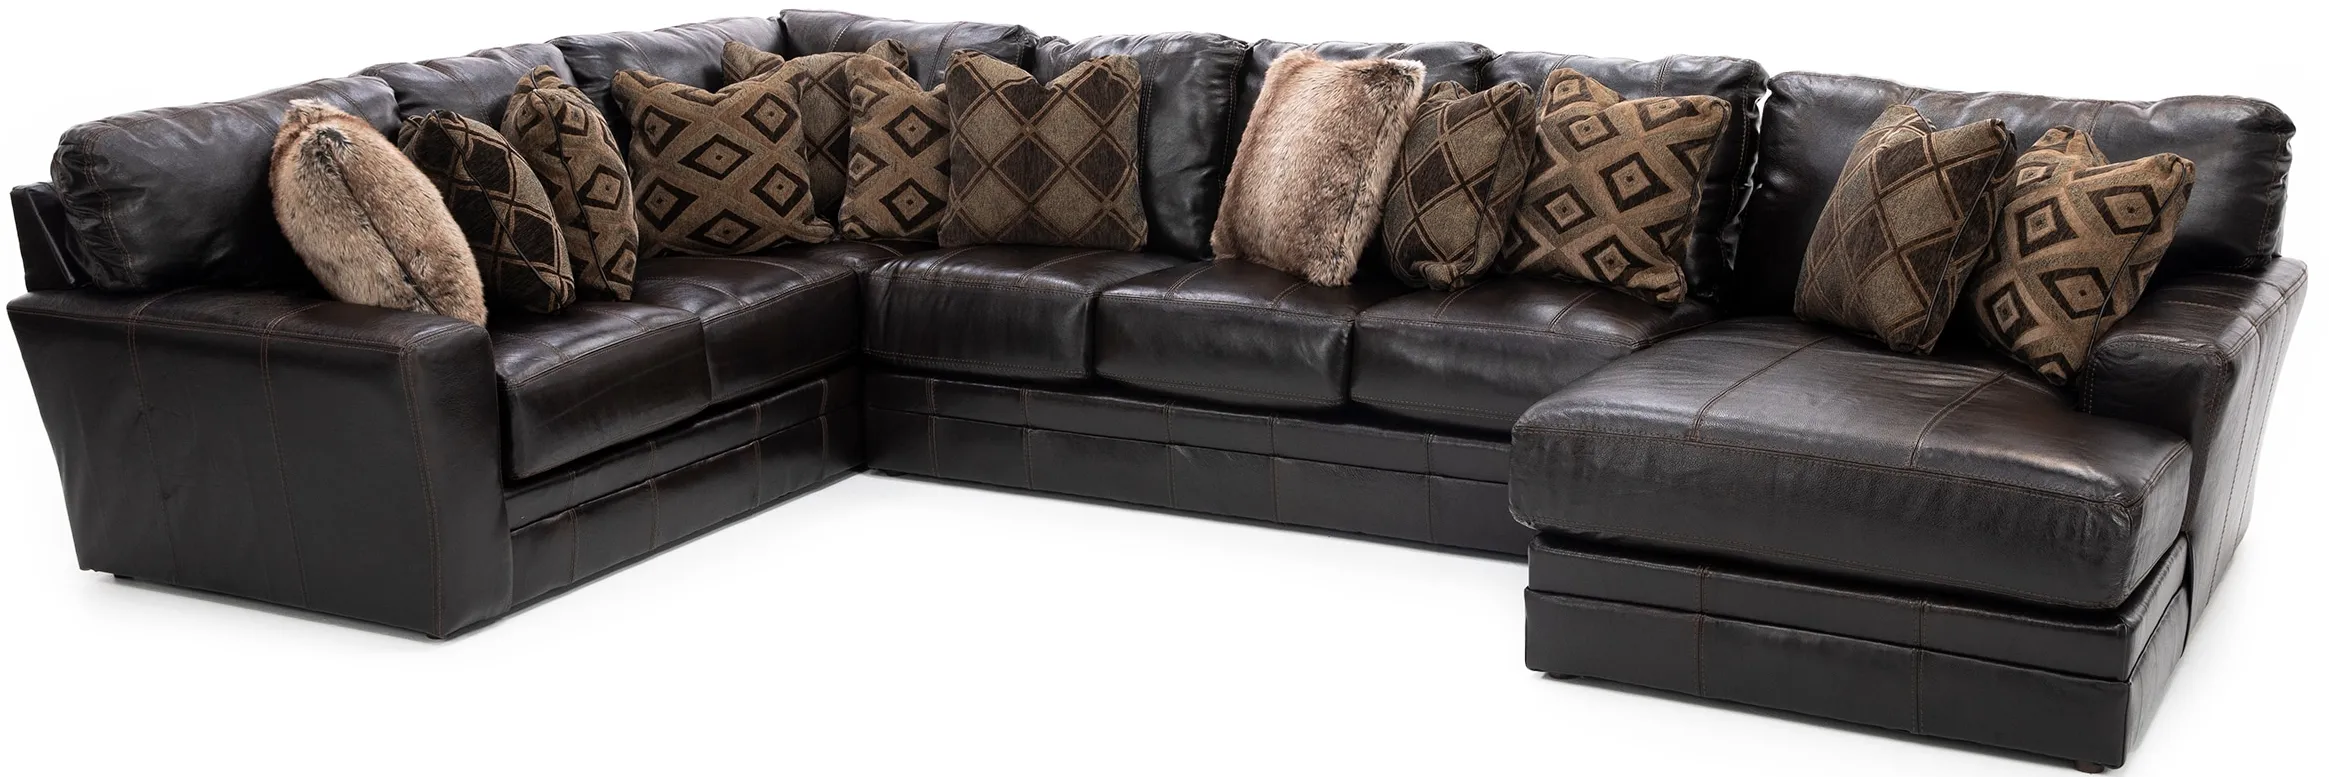 Camden Large 3-Pc. Leather Sectional with Right Arm Facing Chaise in Chocolate